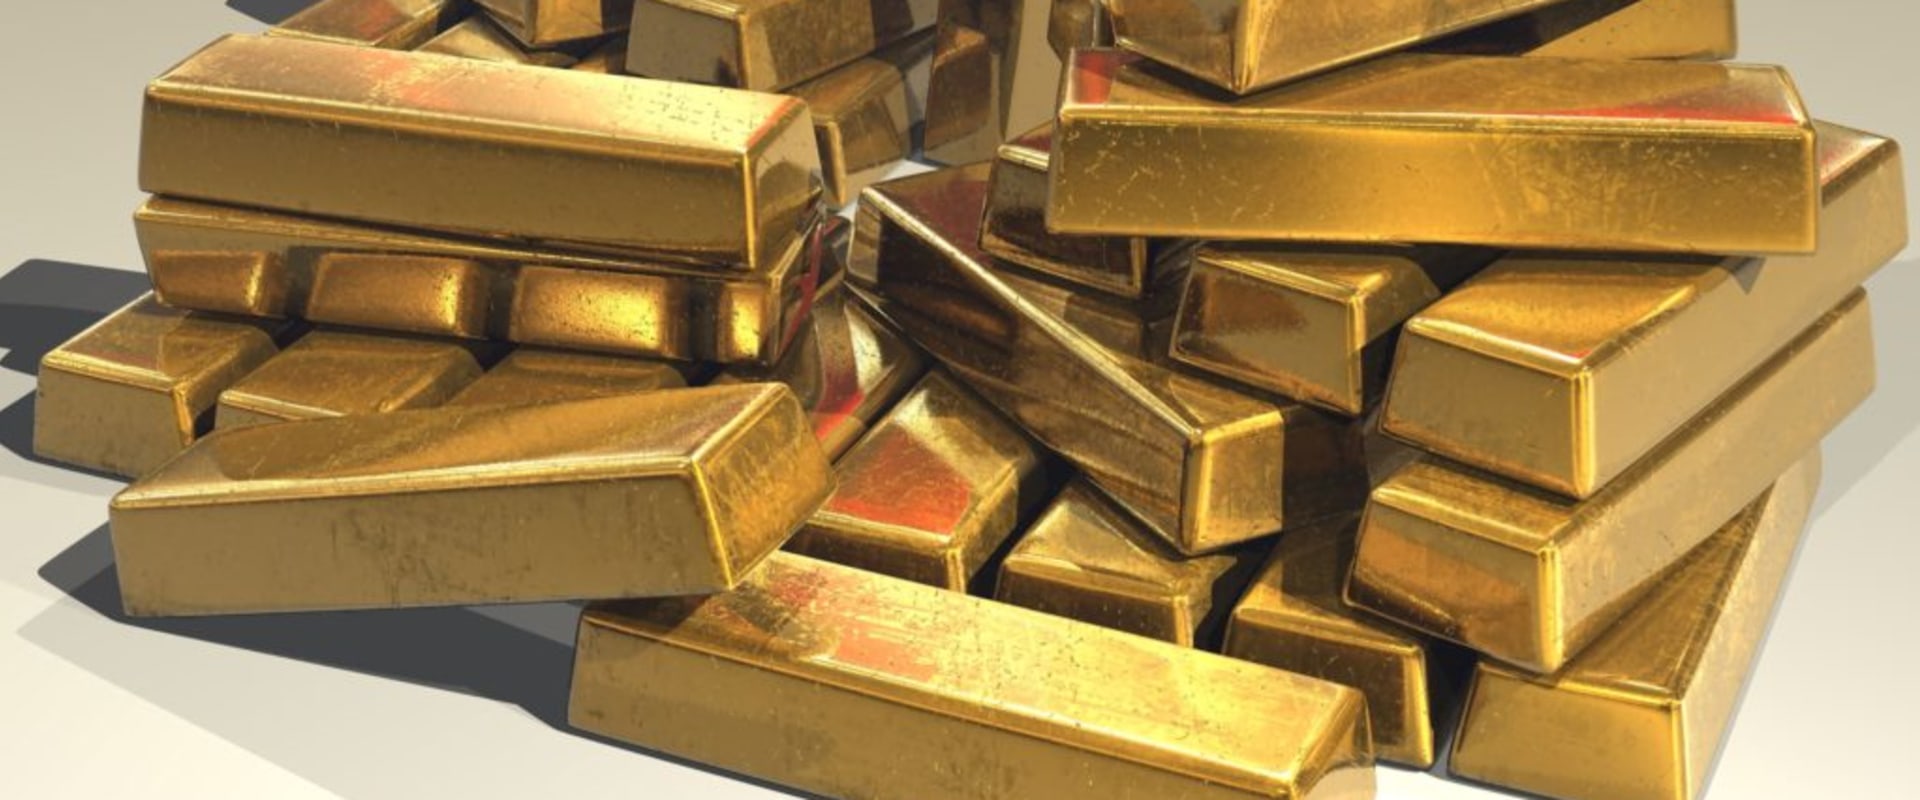 Is Investing in Gold Still a Good Idea?